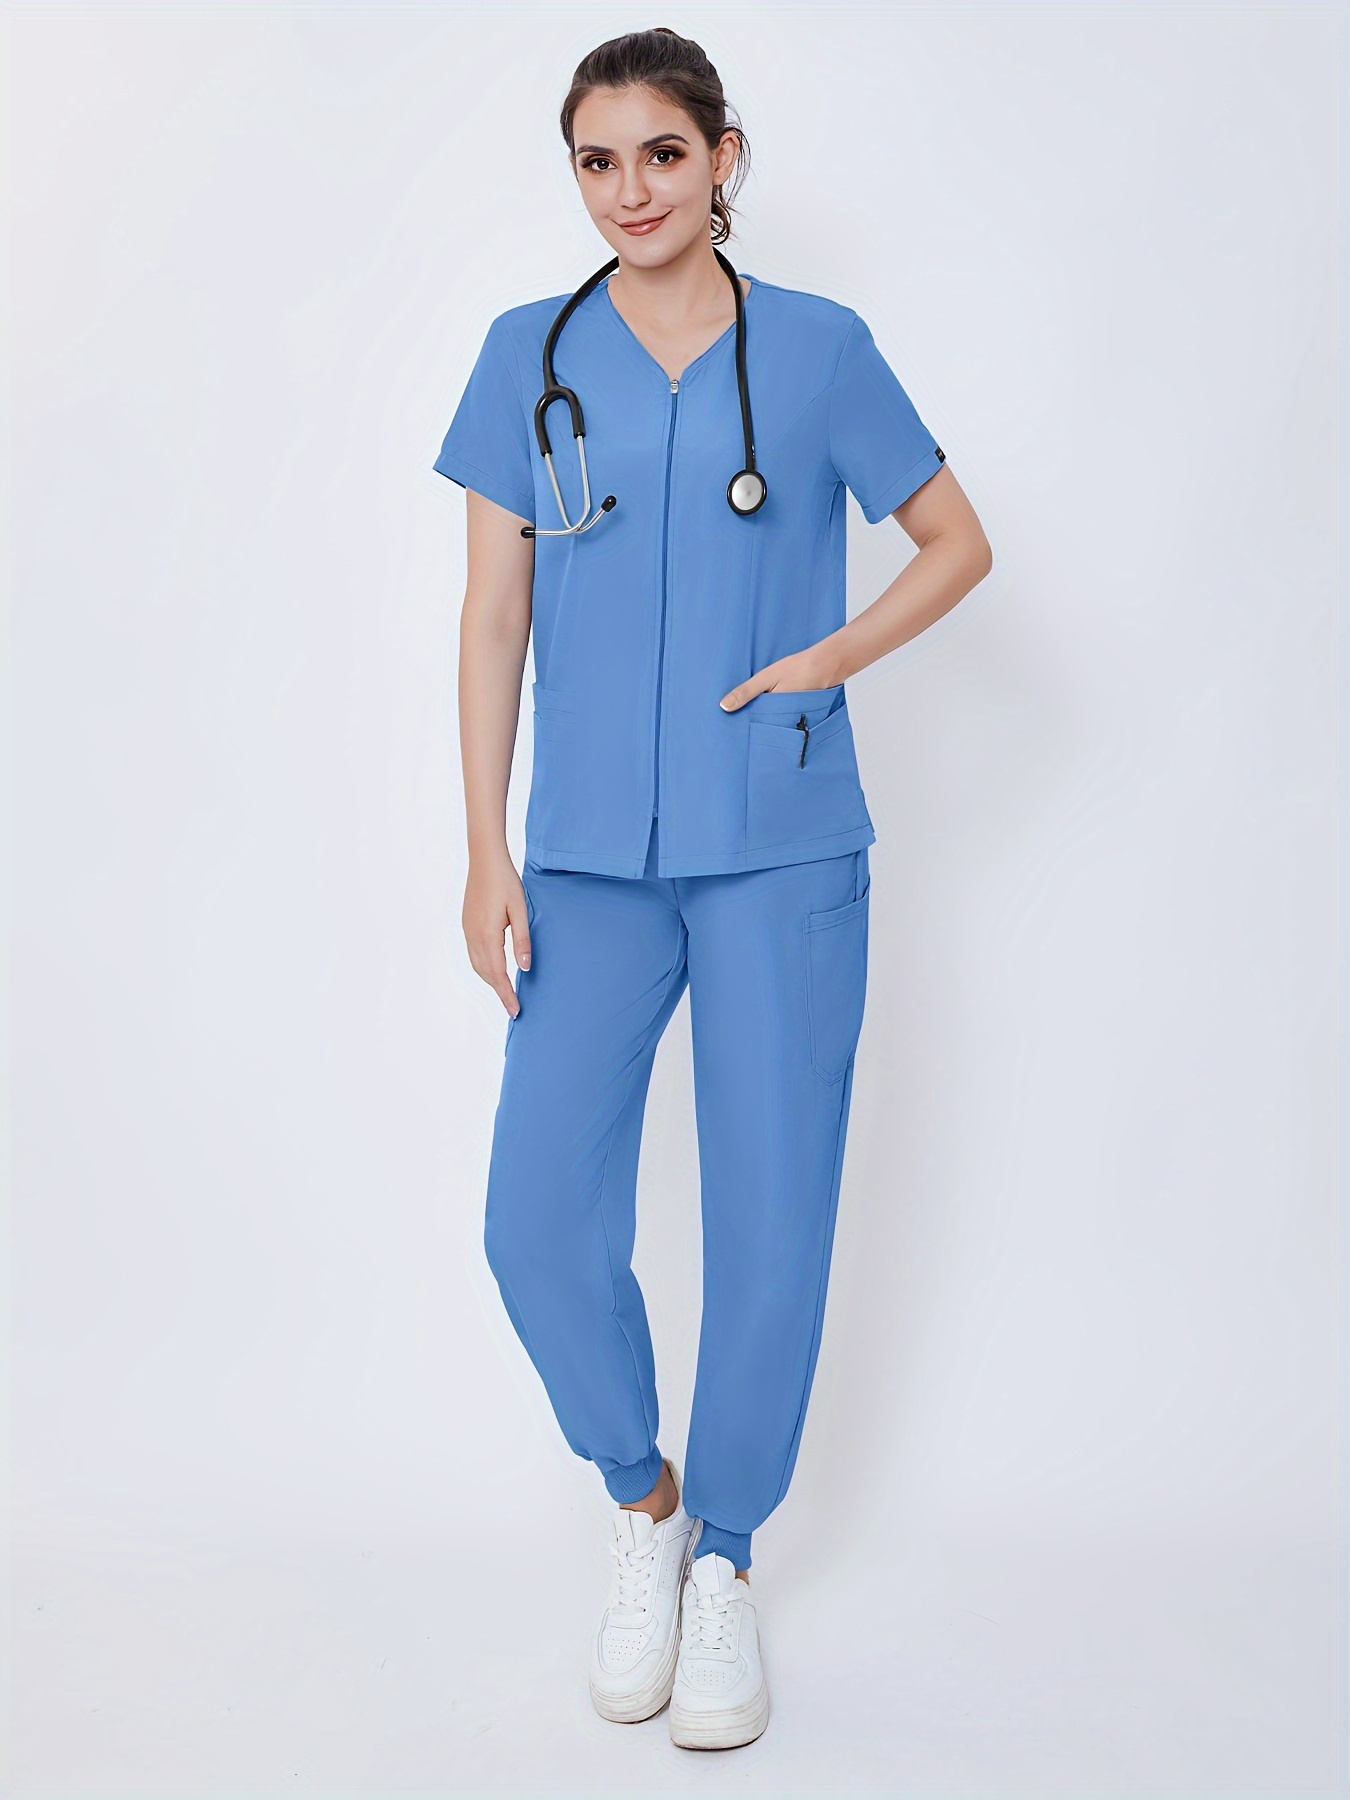 For Tall Women In The Medical Workplace, These Scrub Pants Are Perfect -  Blue Sky Scrubs